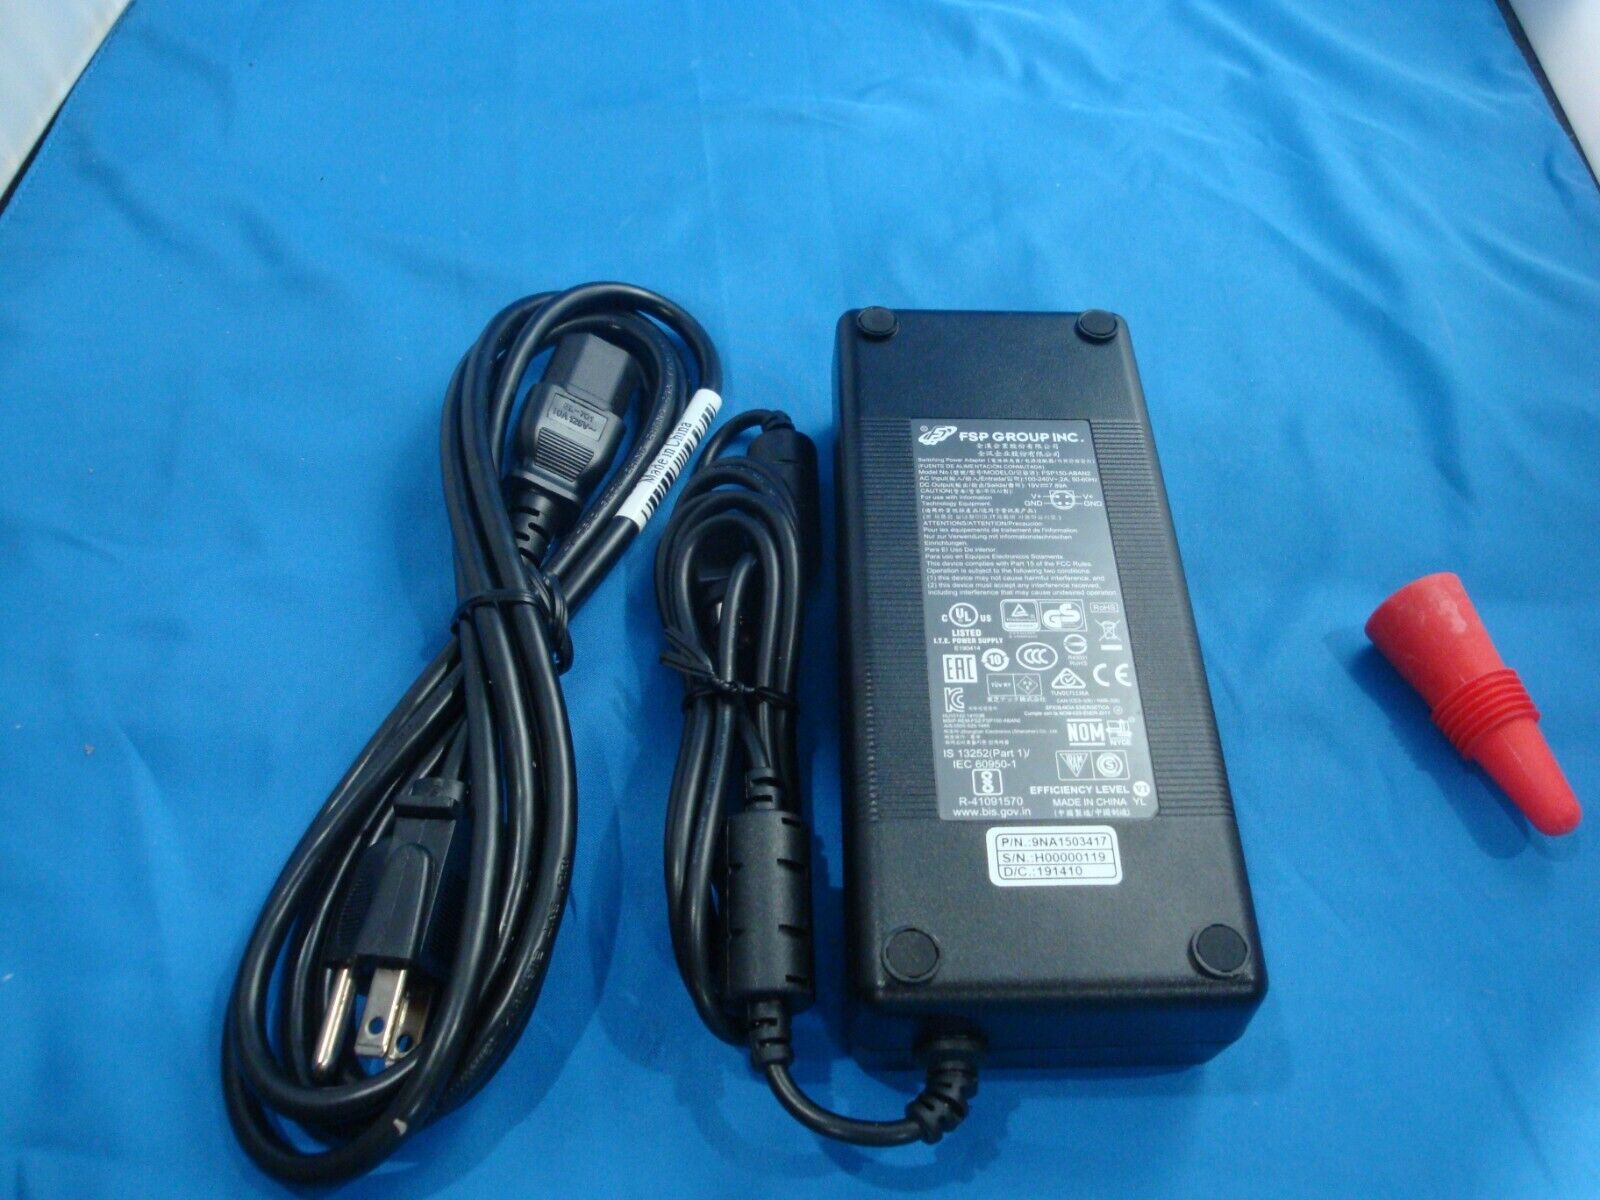 FSP Group FSP150-ABAN2 -19V - 7.89A 4-Pin AC Adapter